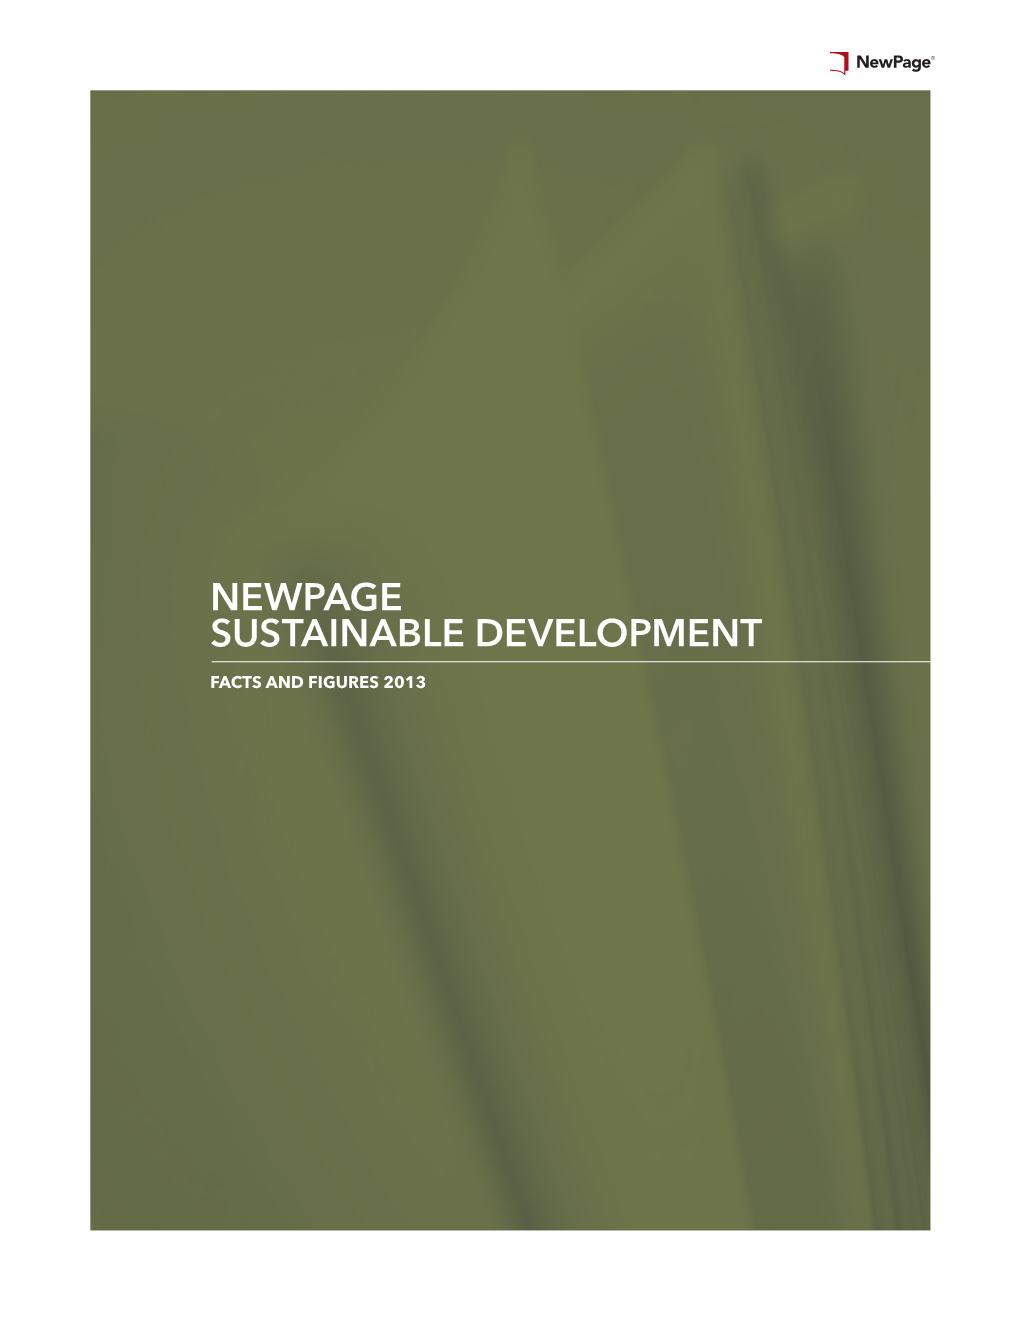 Newpage Sustainable Development Facts and Figures 2013 2 | Sustainable Development Facts and Figures 2013